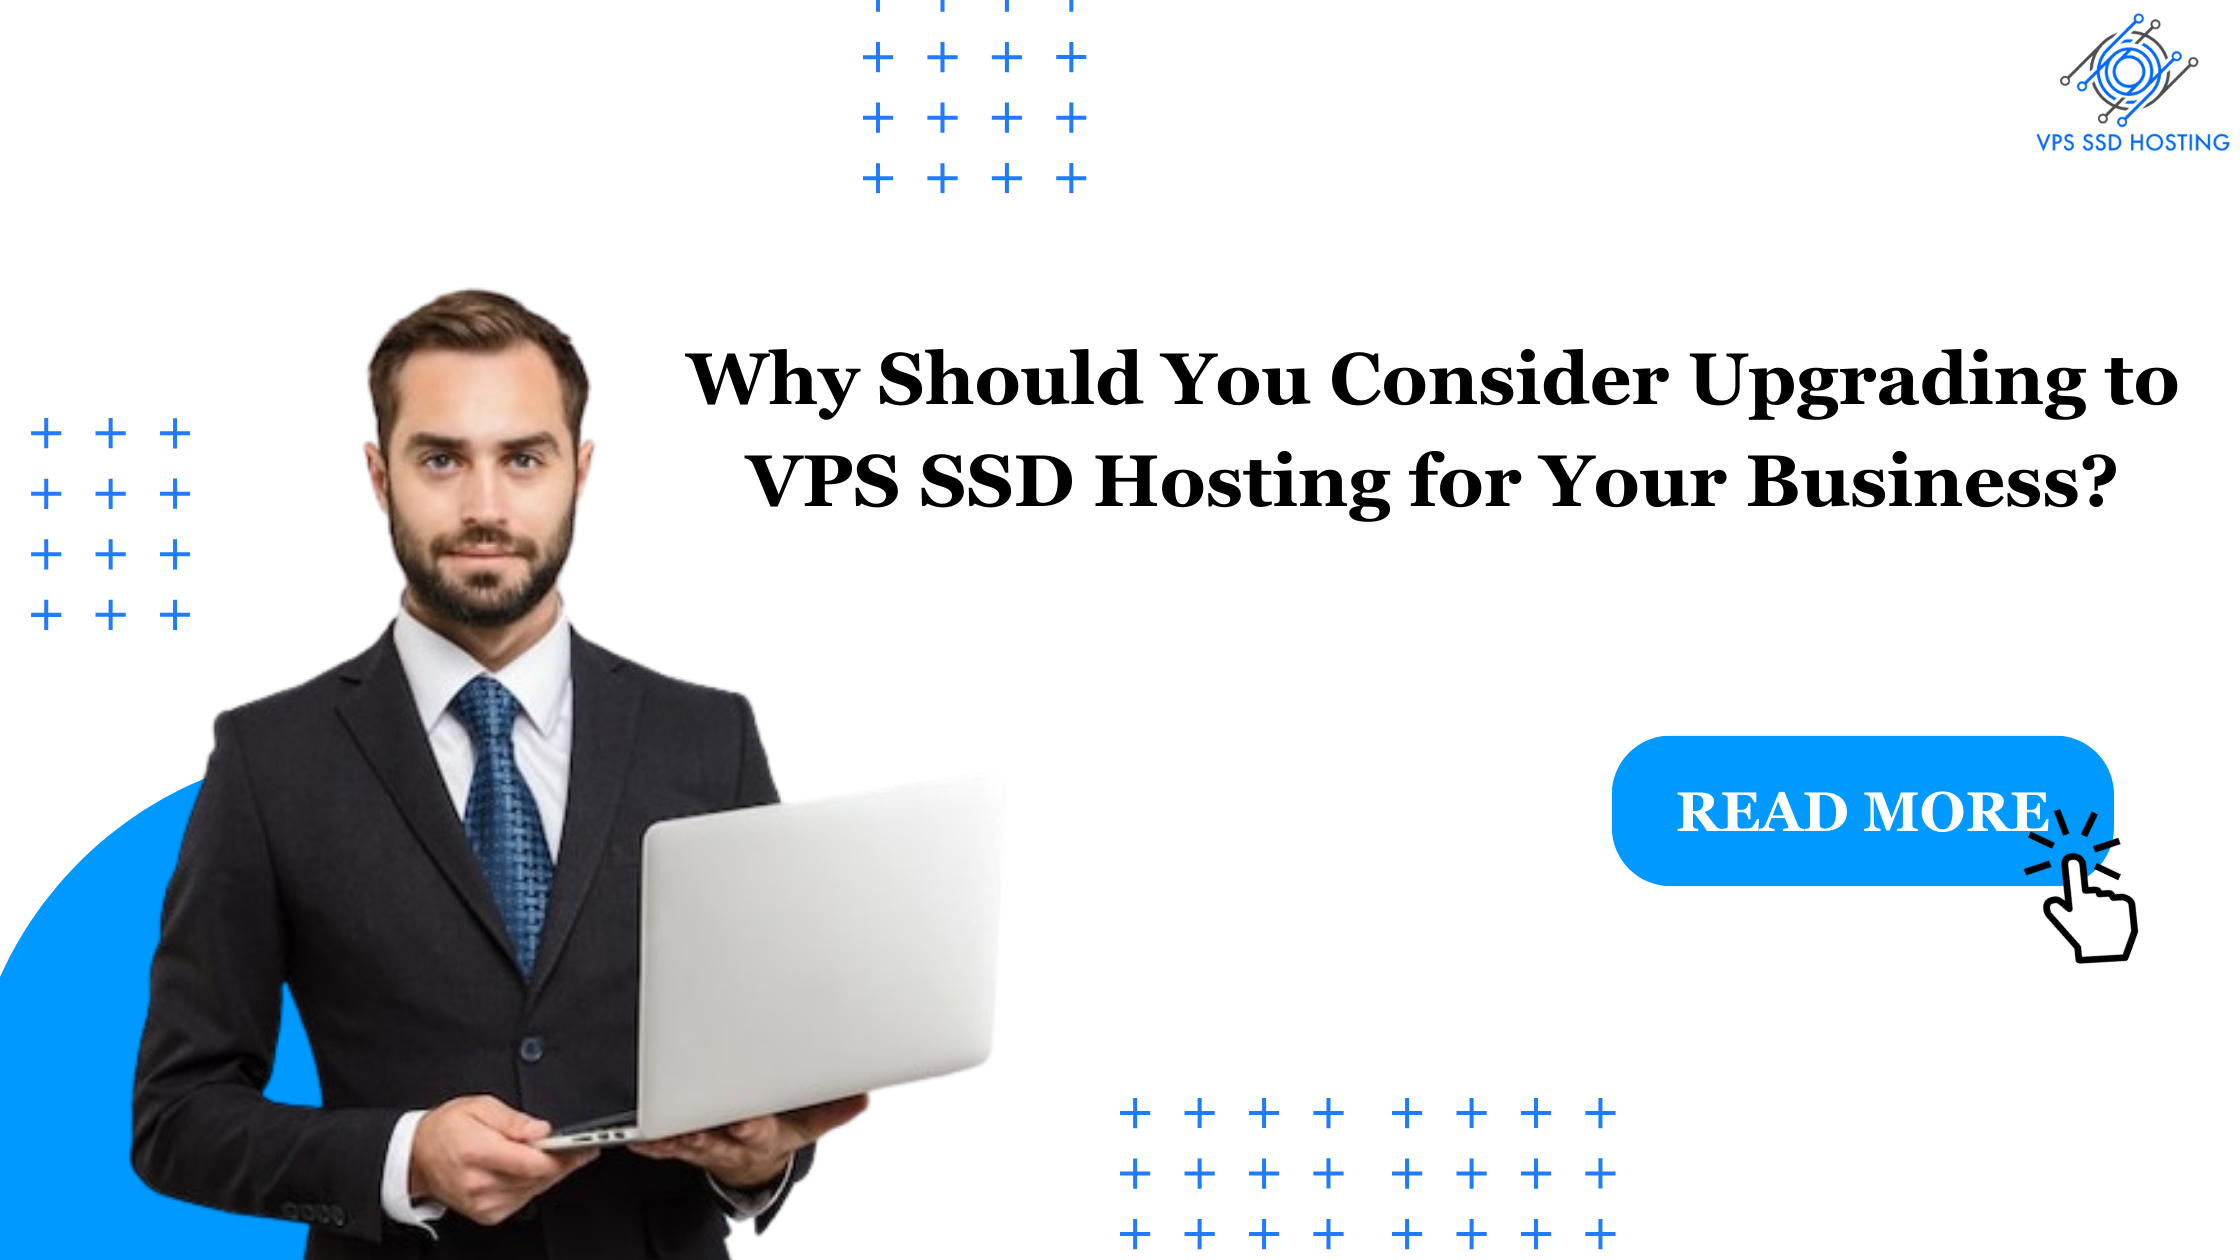 Why Should You Consider Upgrading to VPS SSD Hosting for Your Business?